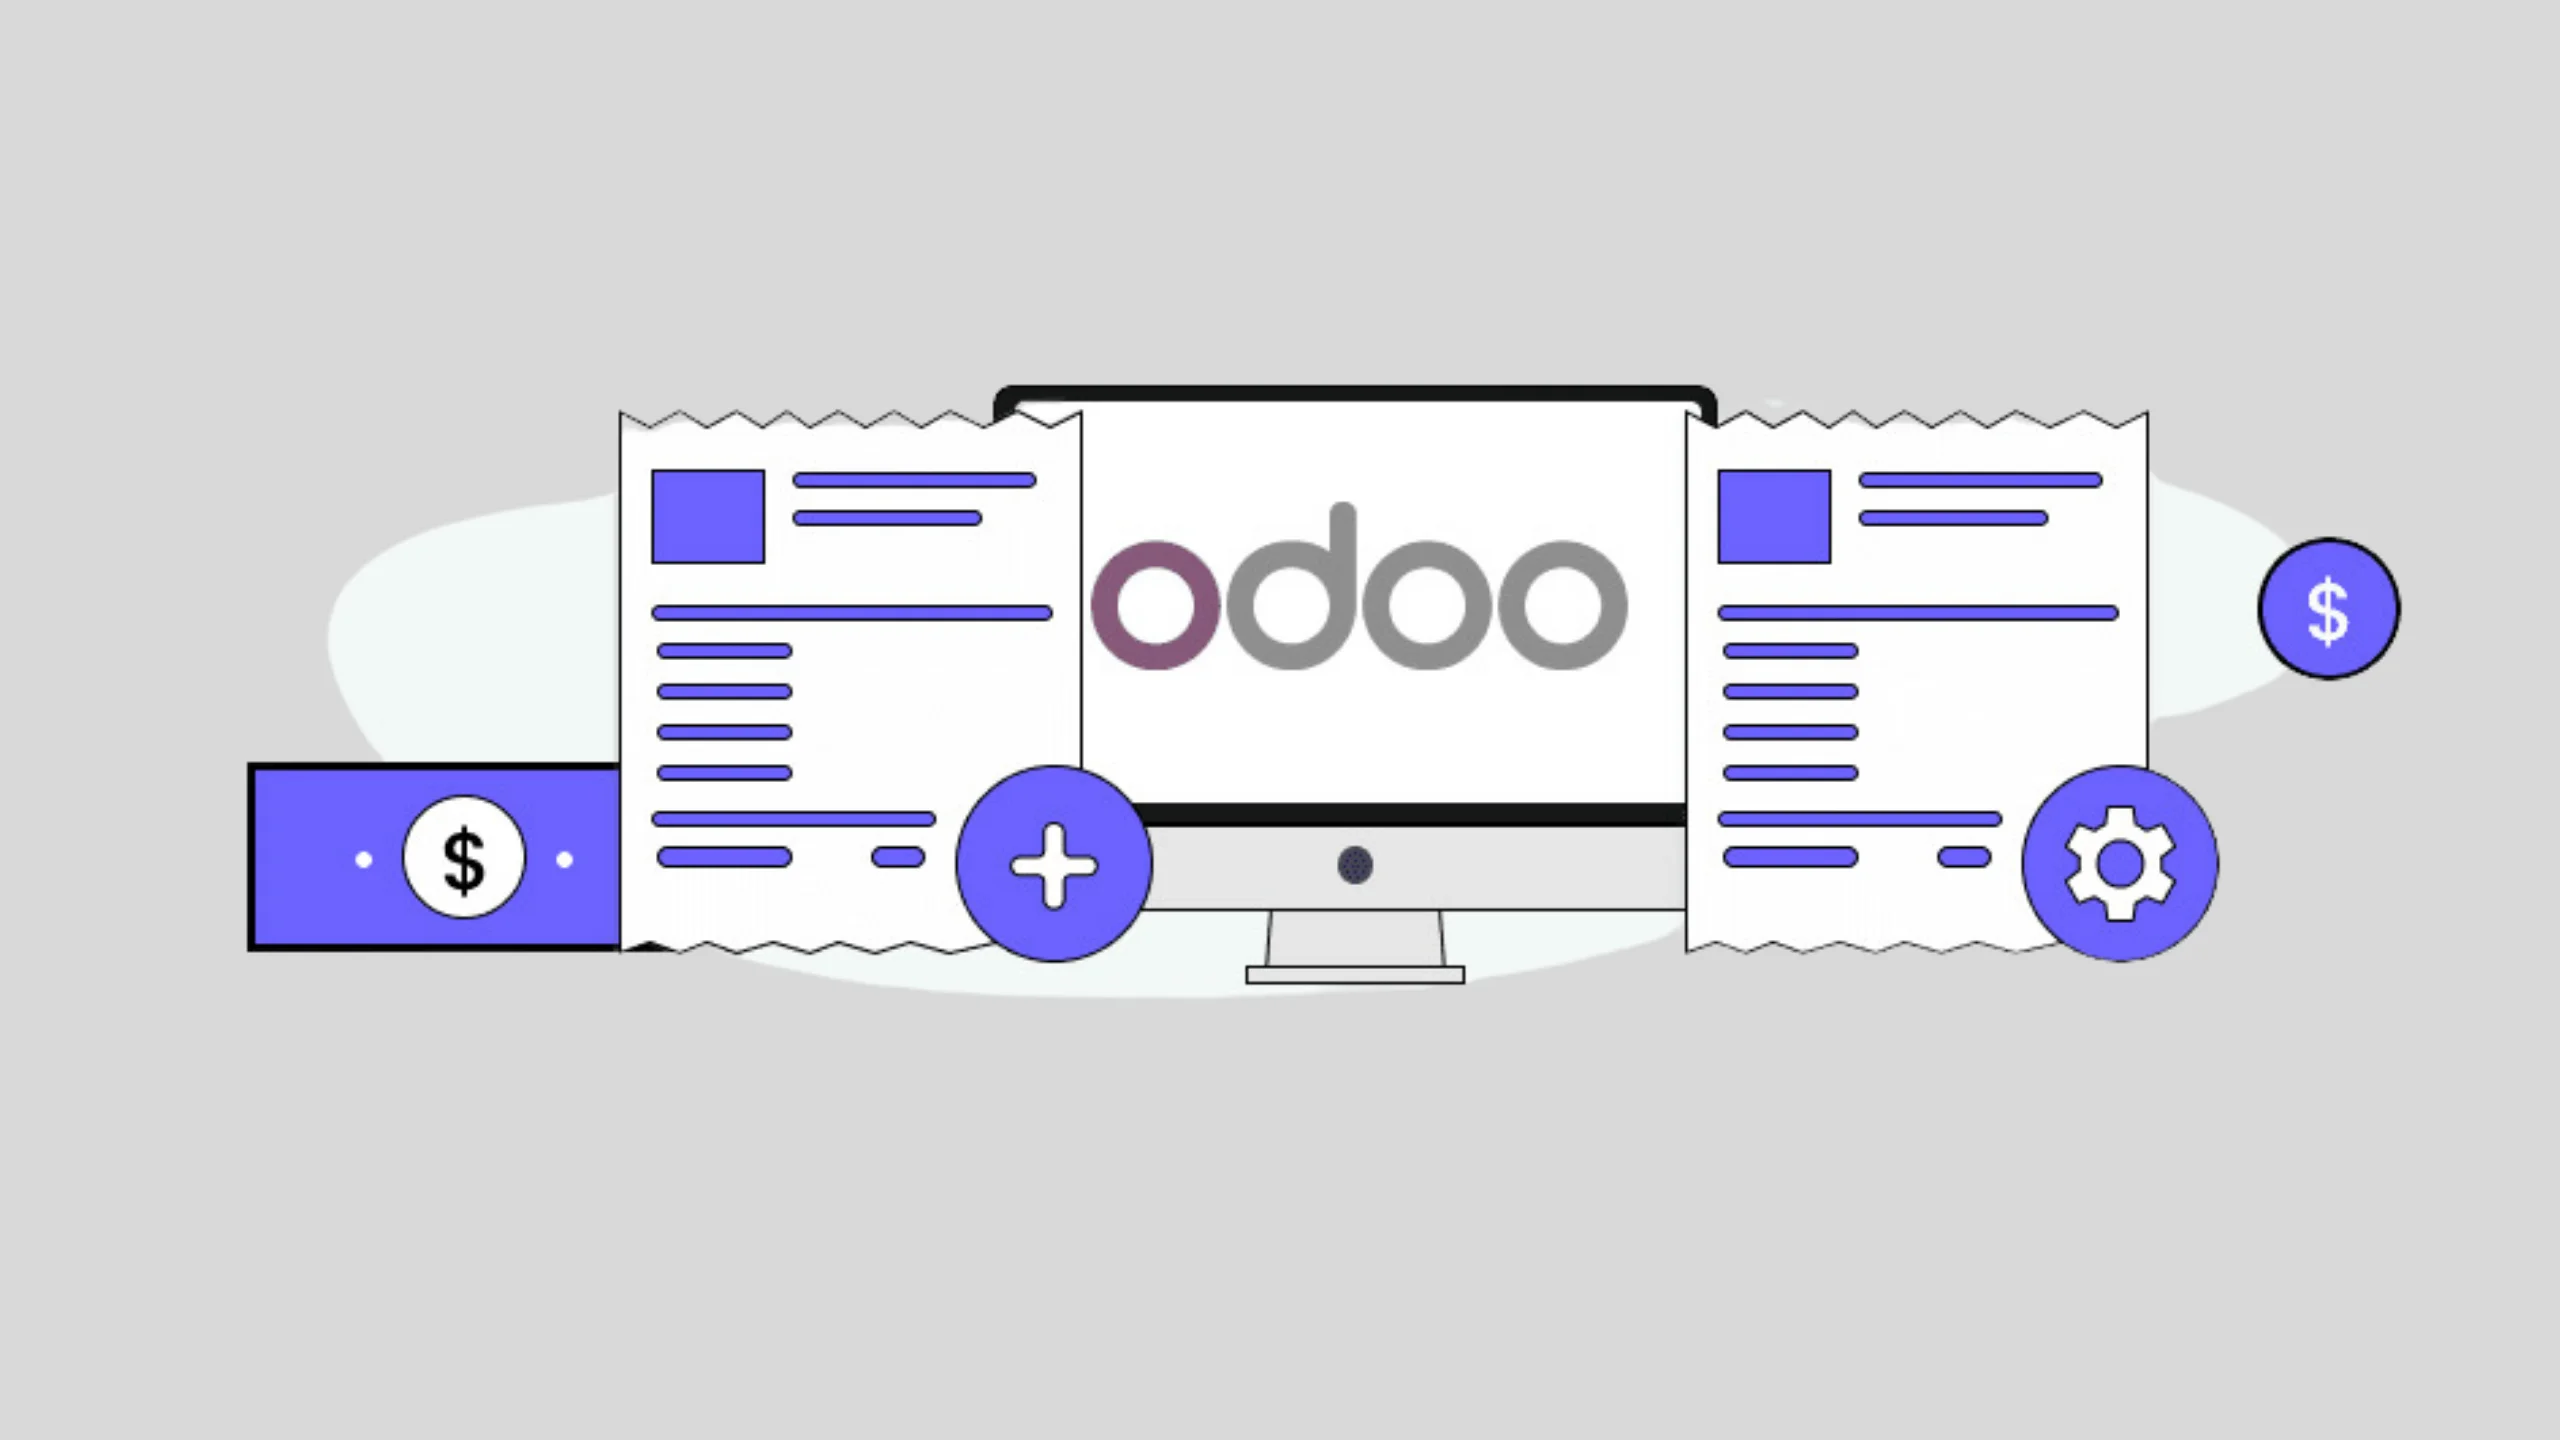 In Odoo, a purchase order is a formal document issued by a buyer to a vendor, indicating the types, quantities, and agreed prices for products or services